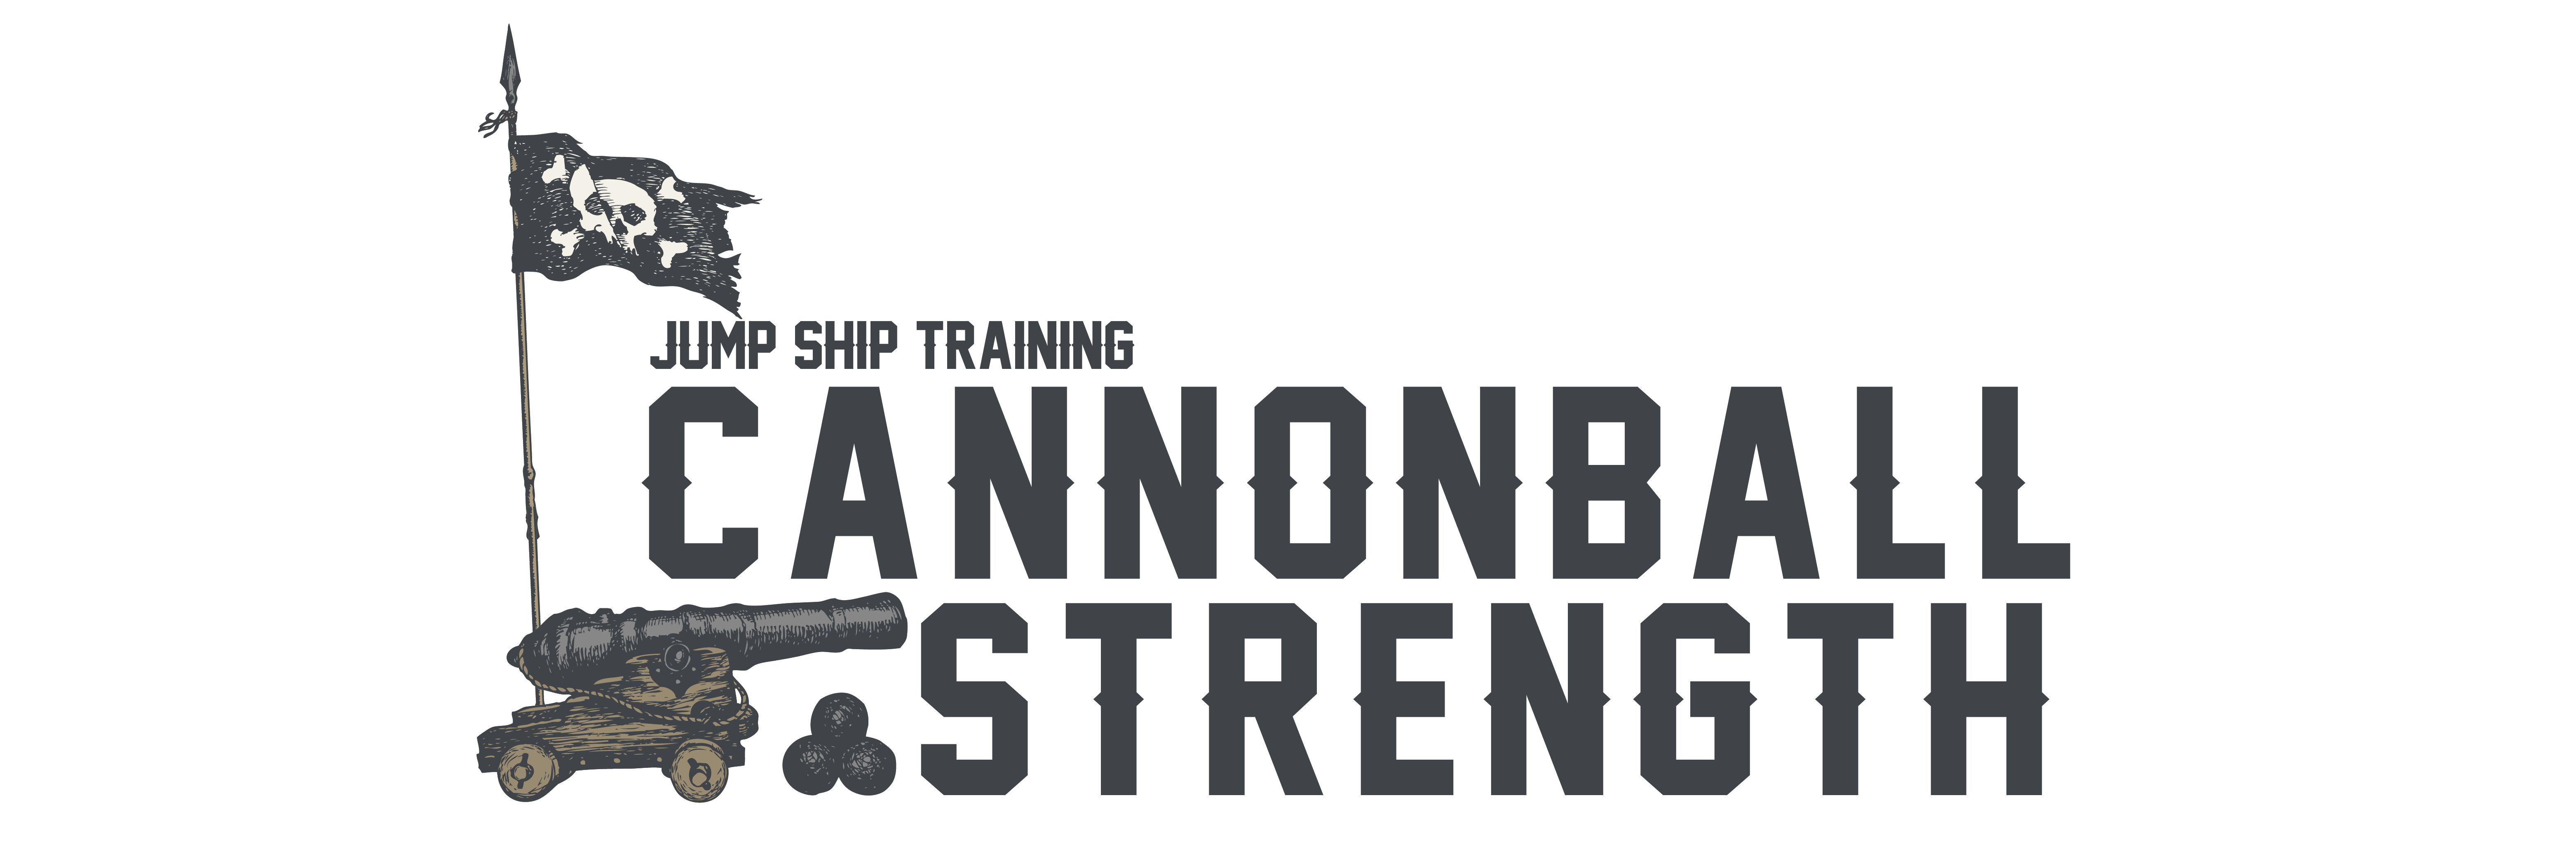 Cannonball Strength - Powerlifting/Bodybuilding Cycle